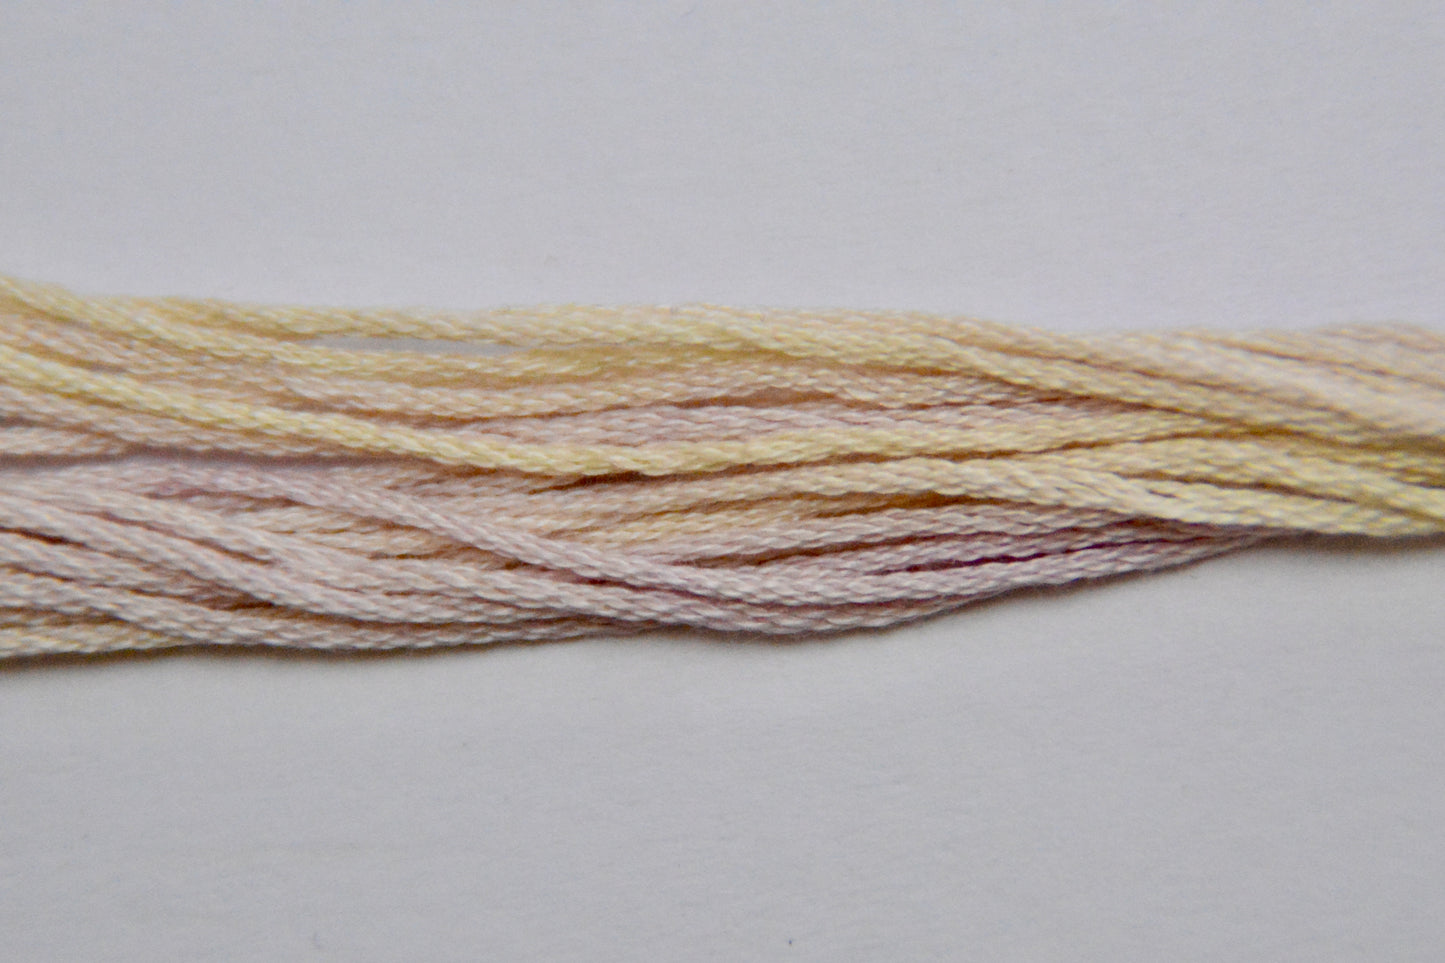 Purple Toile Classic Colorworks 6 Strand Hand-Dyed Embroidery Floss